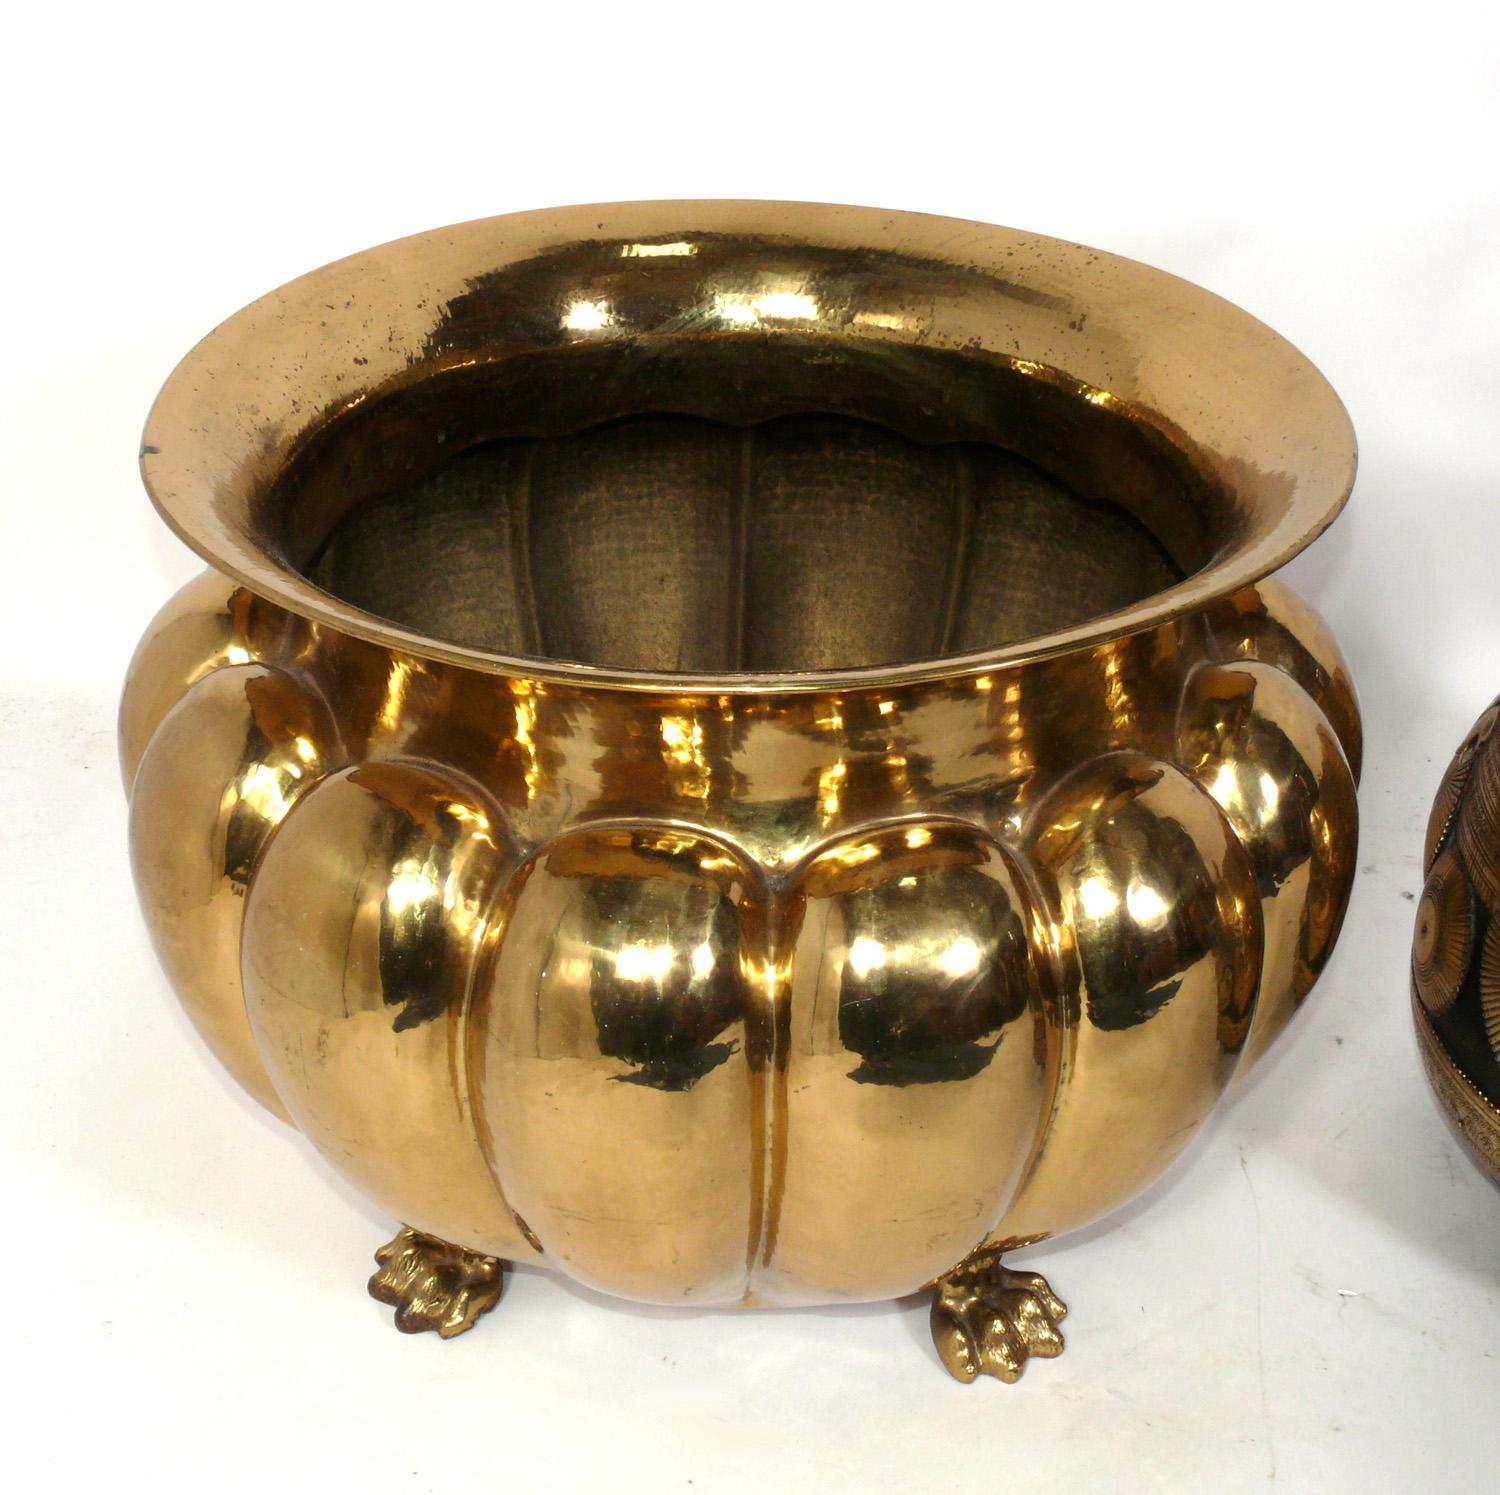 Selection of Brass Planters, circa 1950s, or perhaps much earlier. They are priced at $750 each. 
From left to right, they measure: 15.5